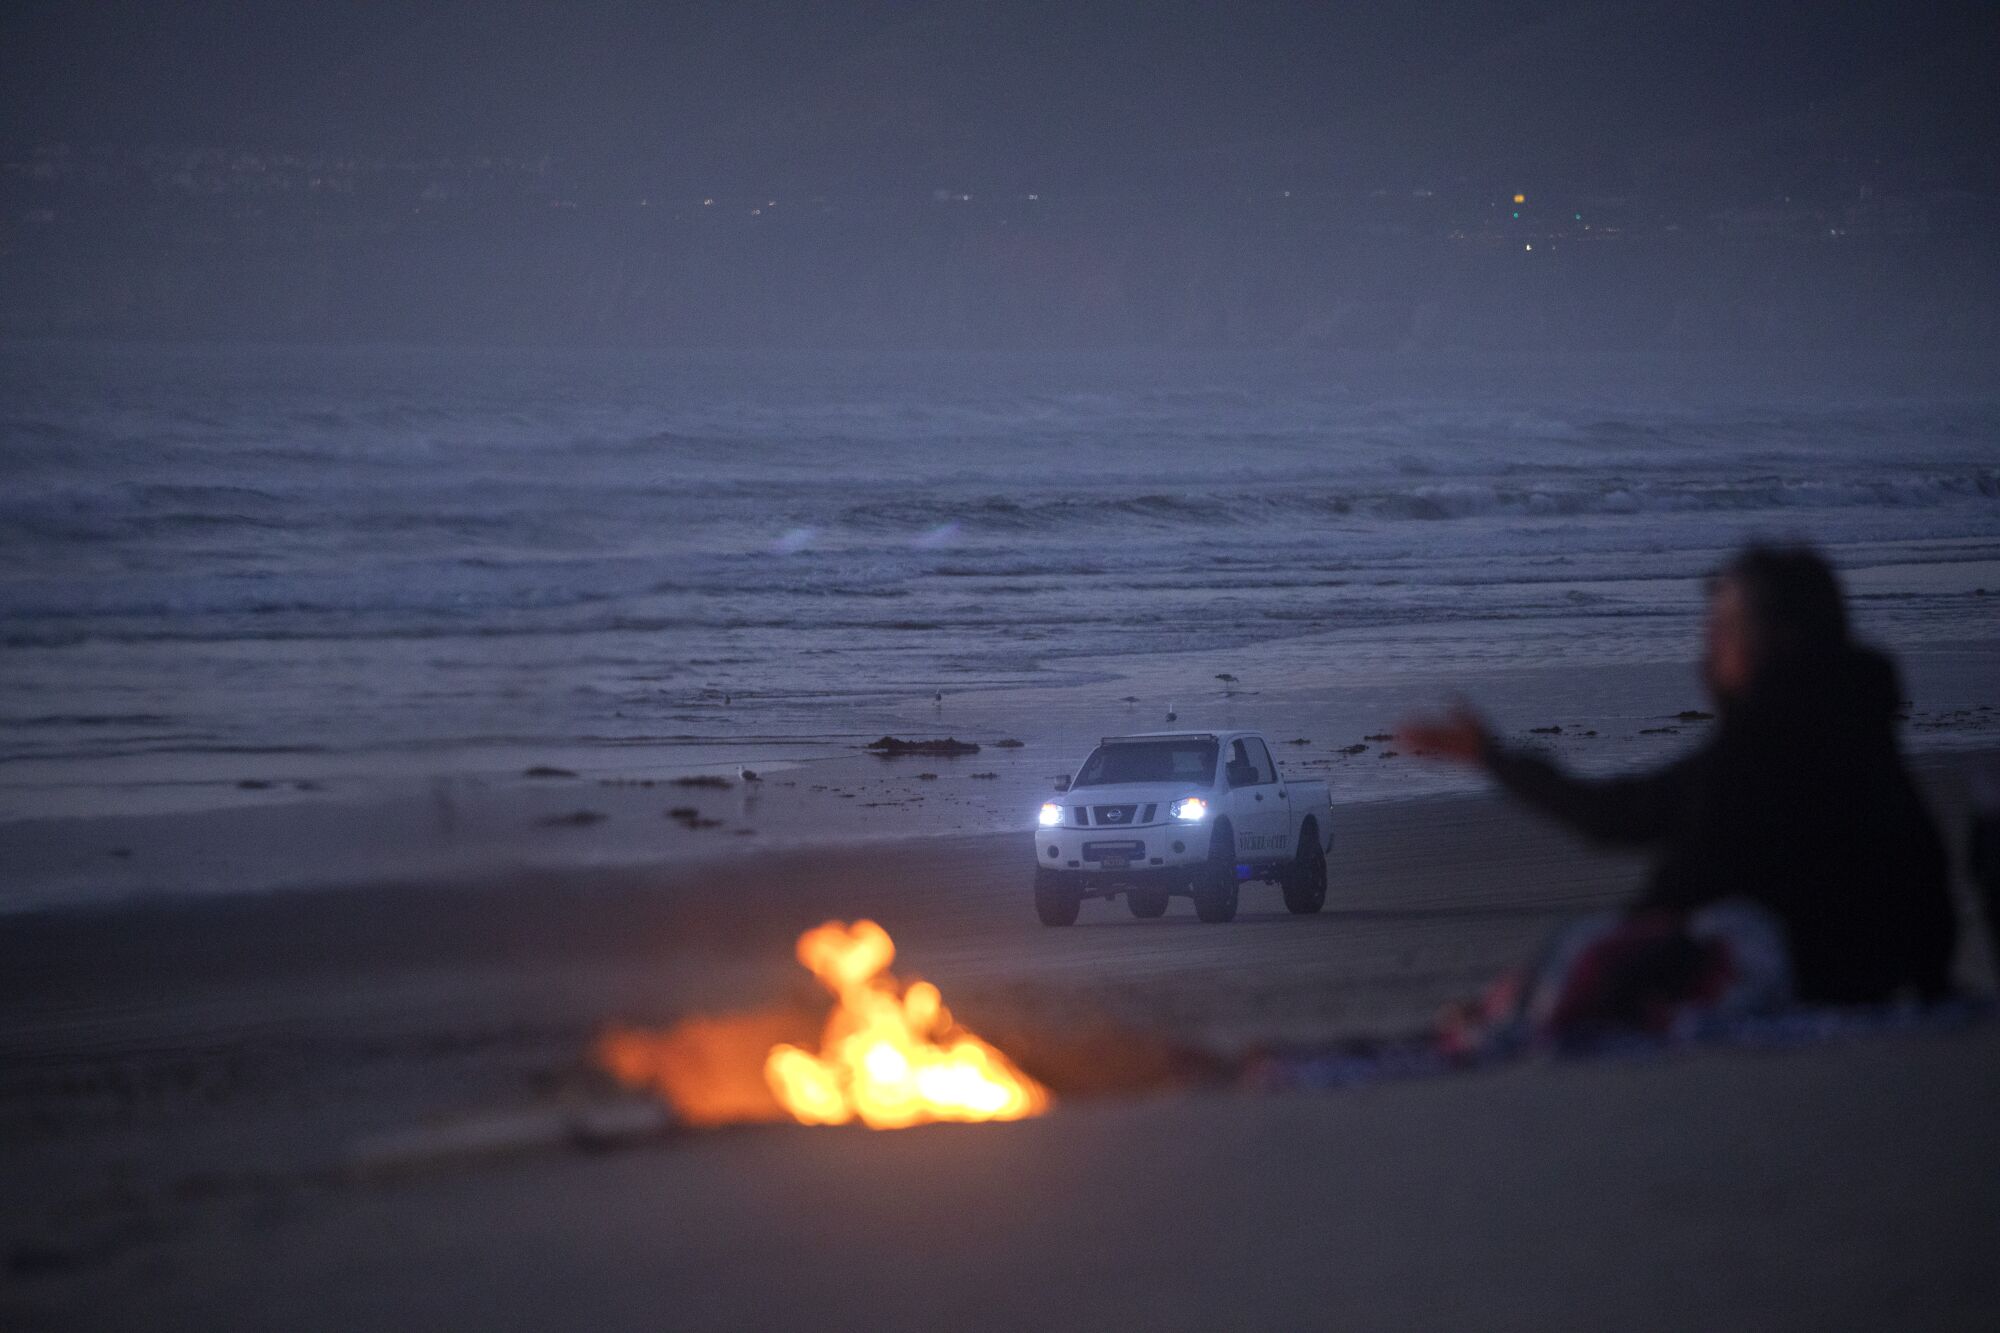 A beach bonfire with a truck in the background